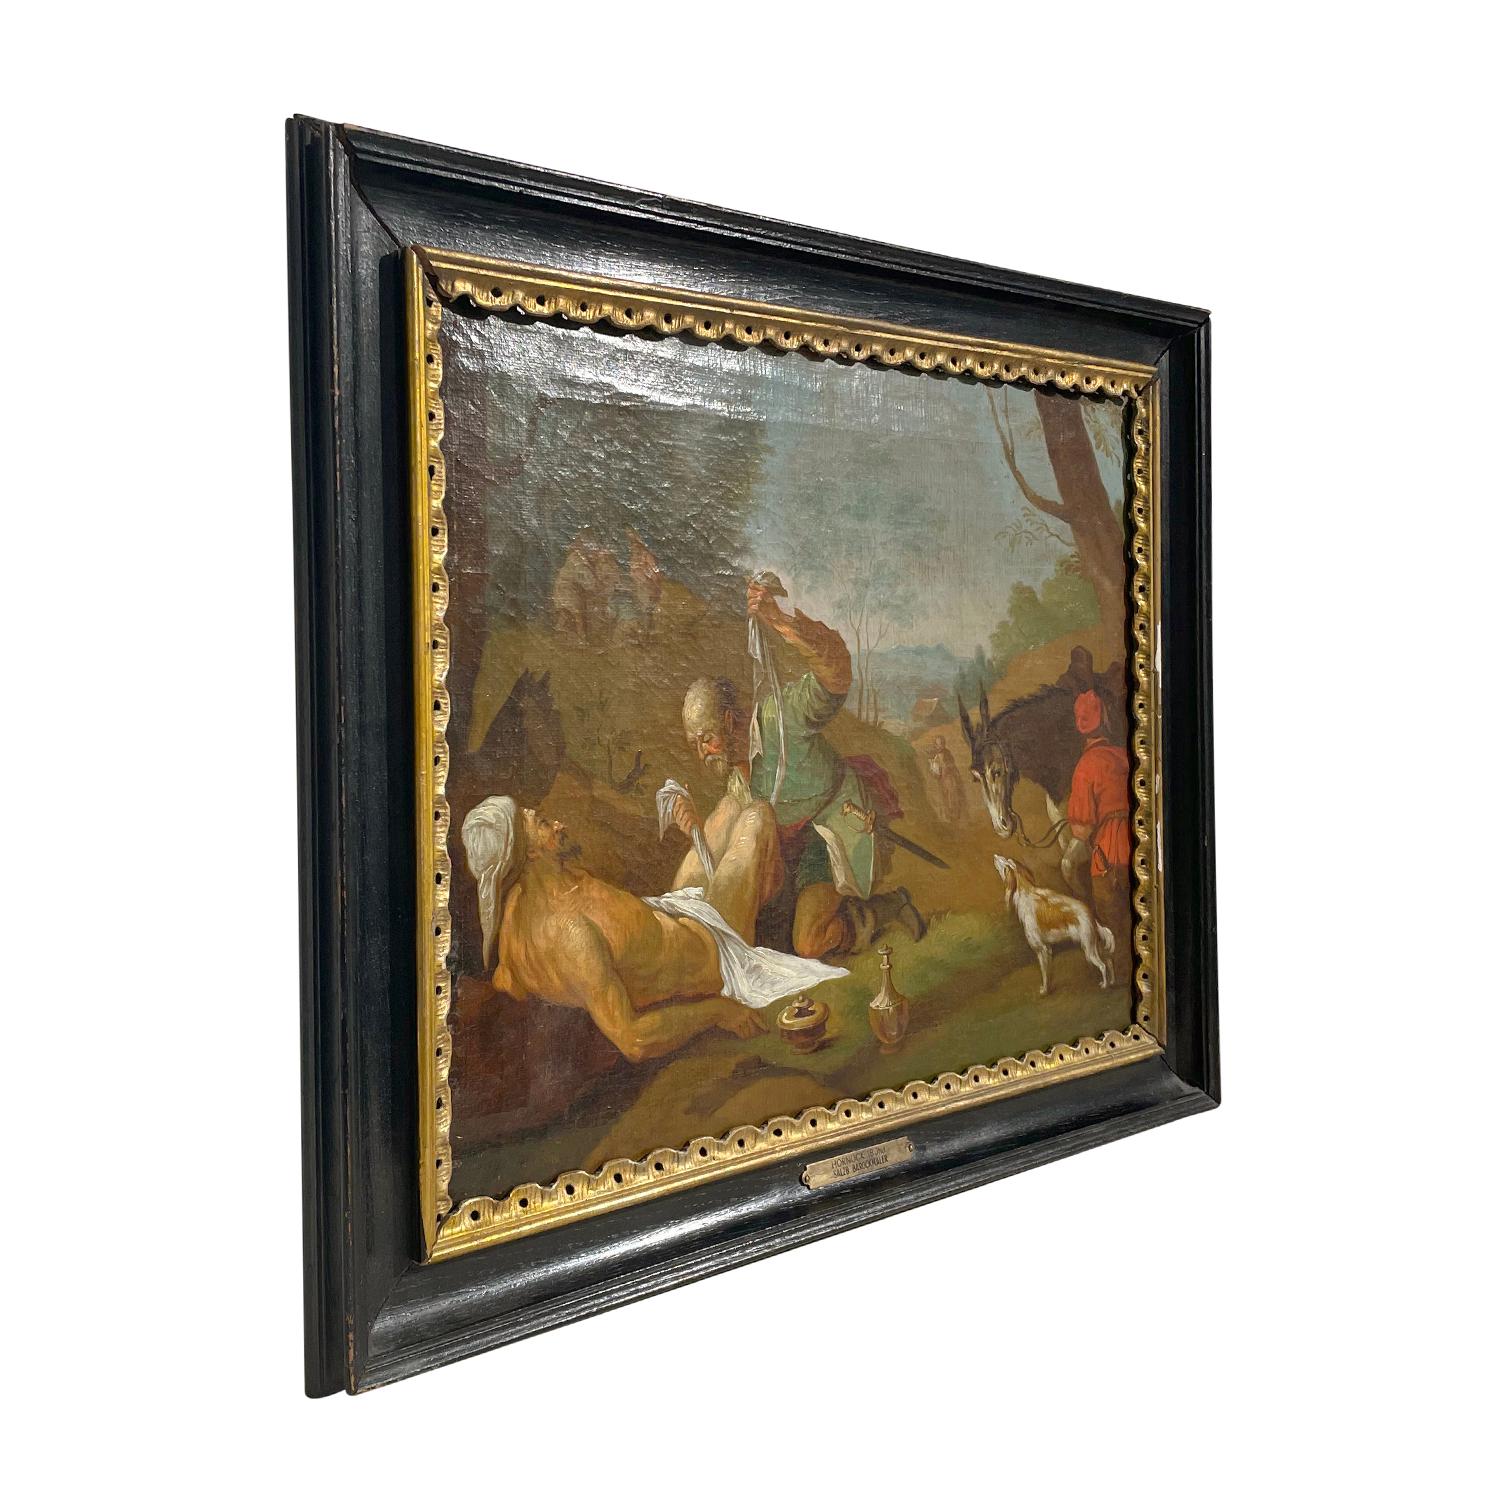 A light-brown, green antique Austrian Baroque oil on canvas painting by Franz Xaver Hornöck in a hand crafted original black, partly gilded wooden frame, in good condition. The vintage painting depicts a wounded nude man receiving assistance from a